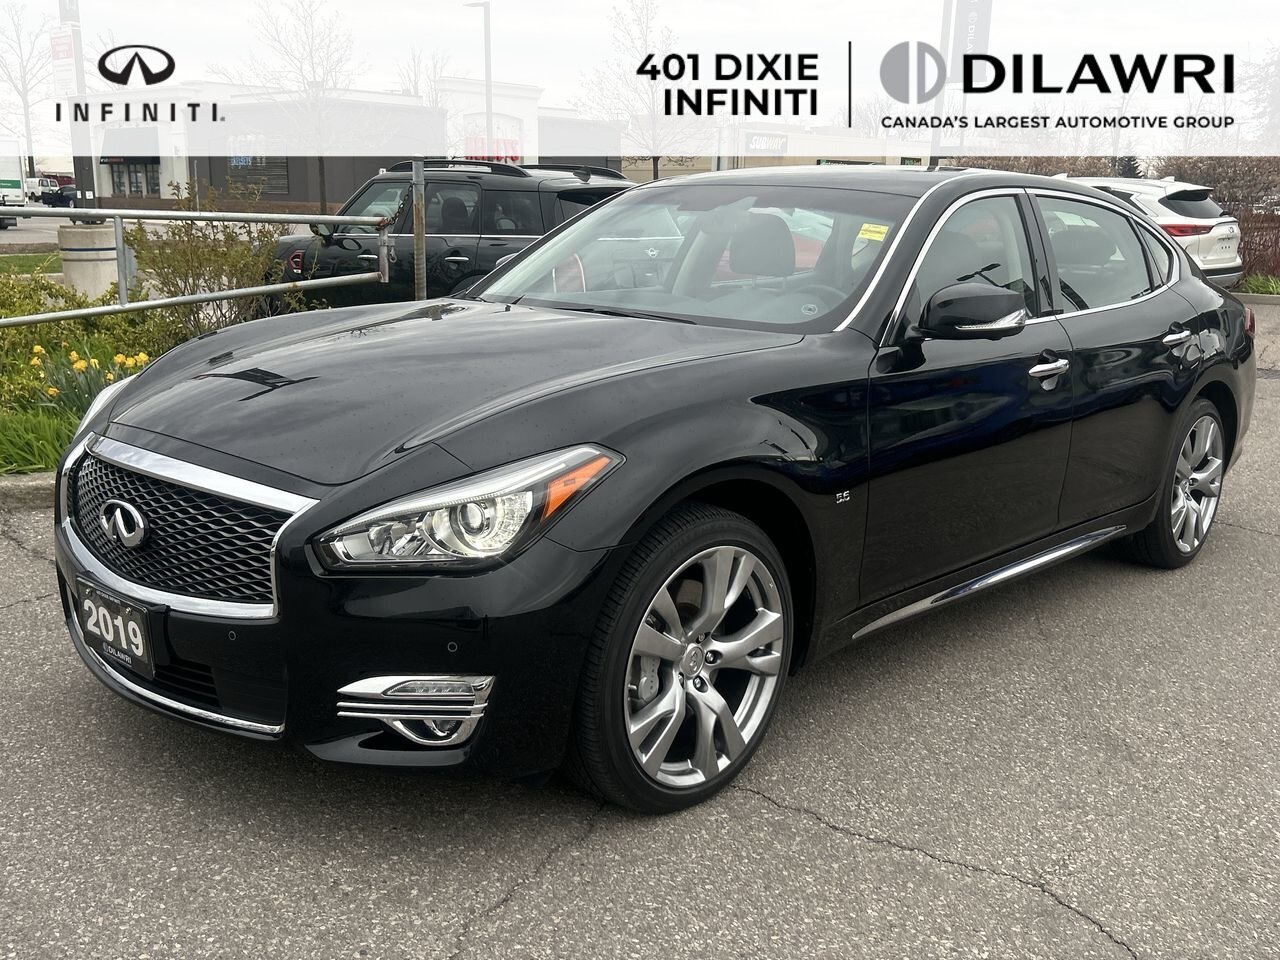 2019 Infiniti Q70L 5.6 - ONLY ONE IN CANADA INTELLIGENT CRUISE / 